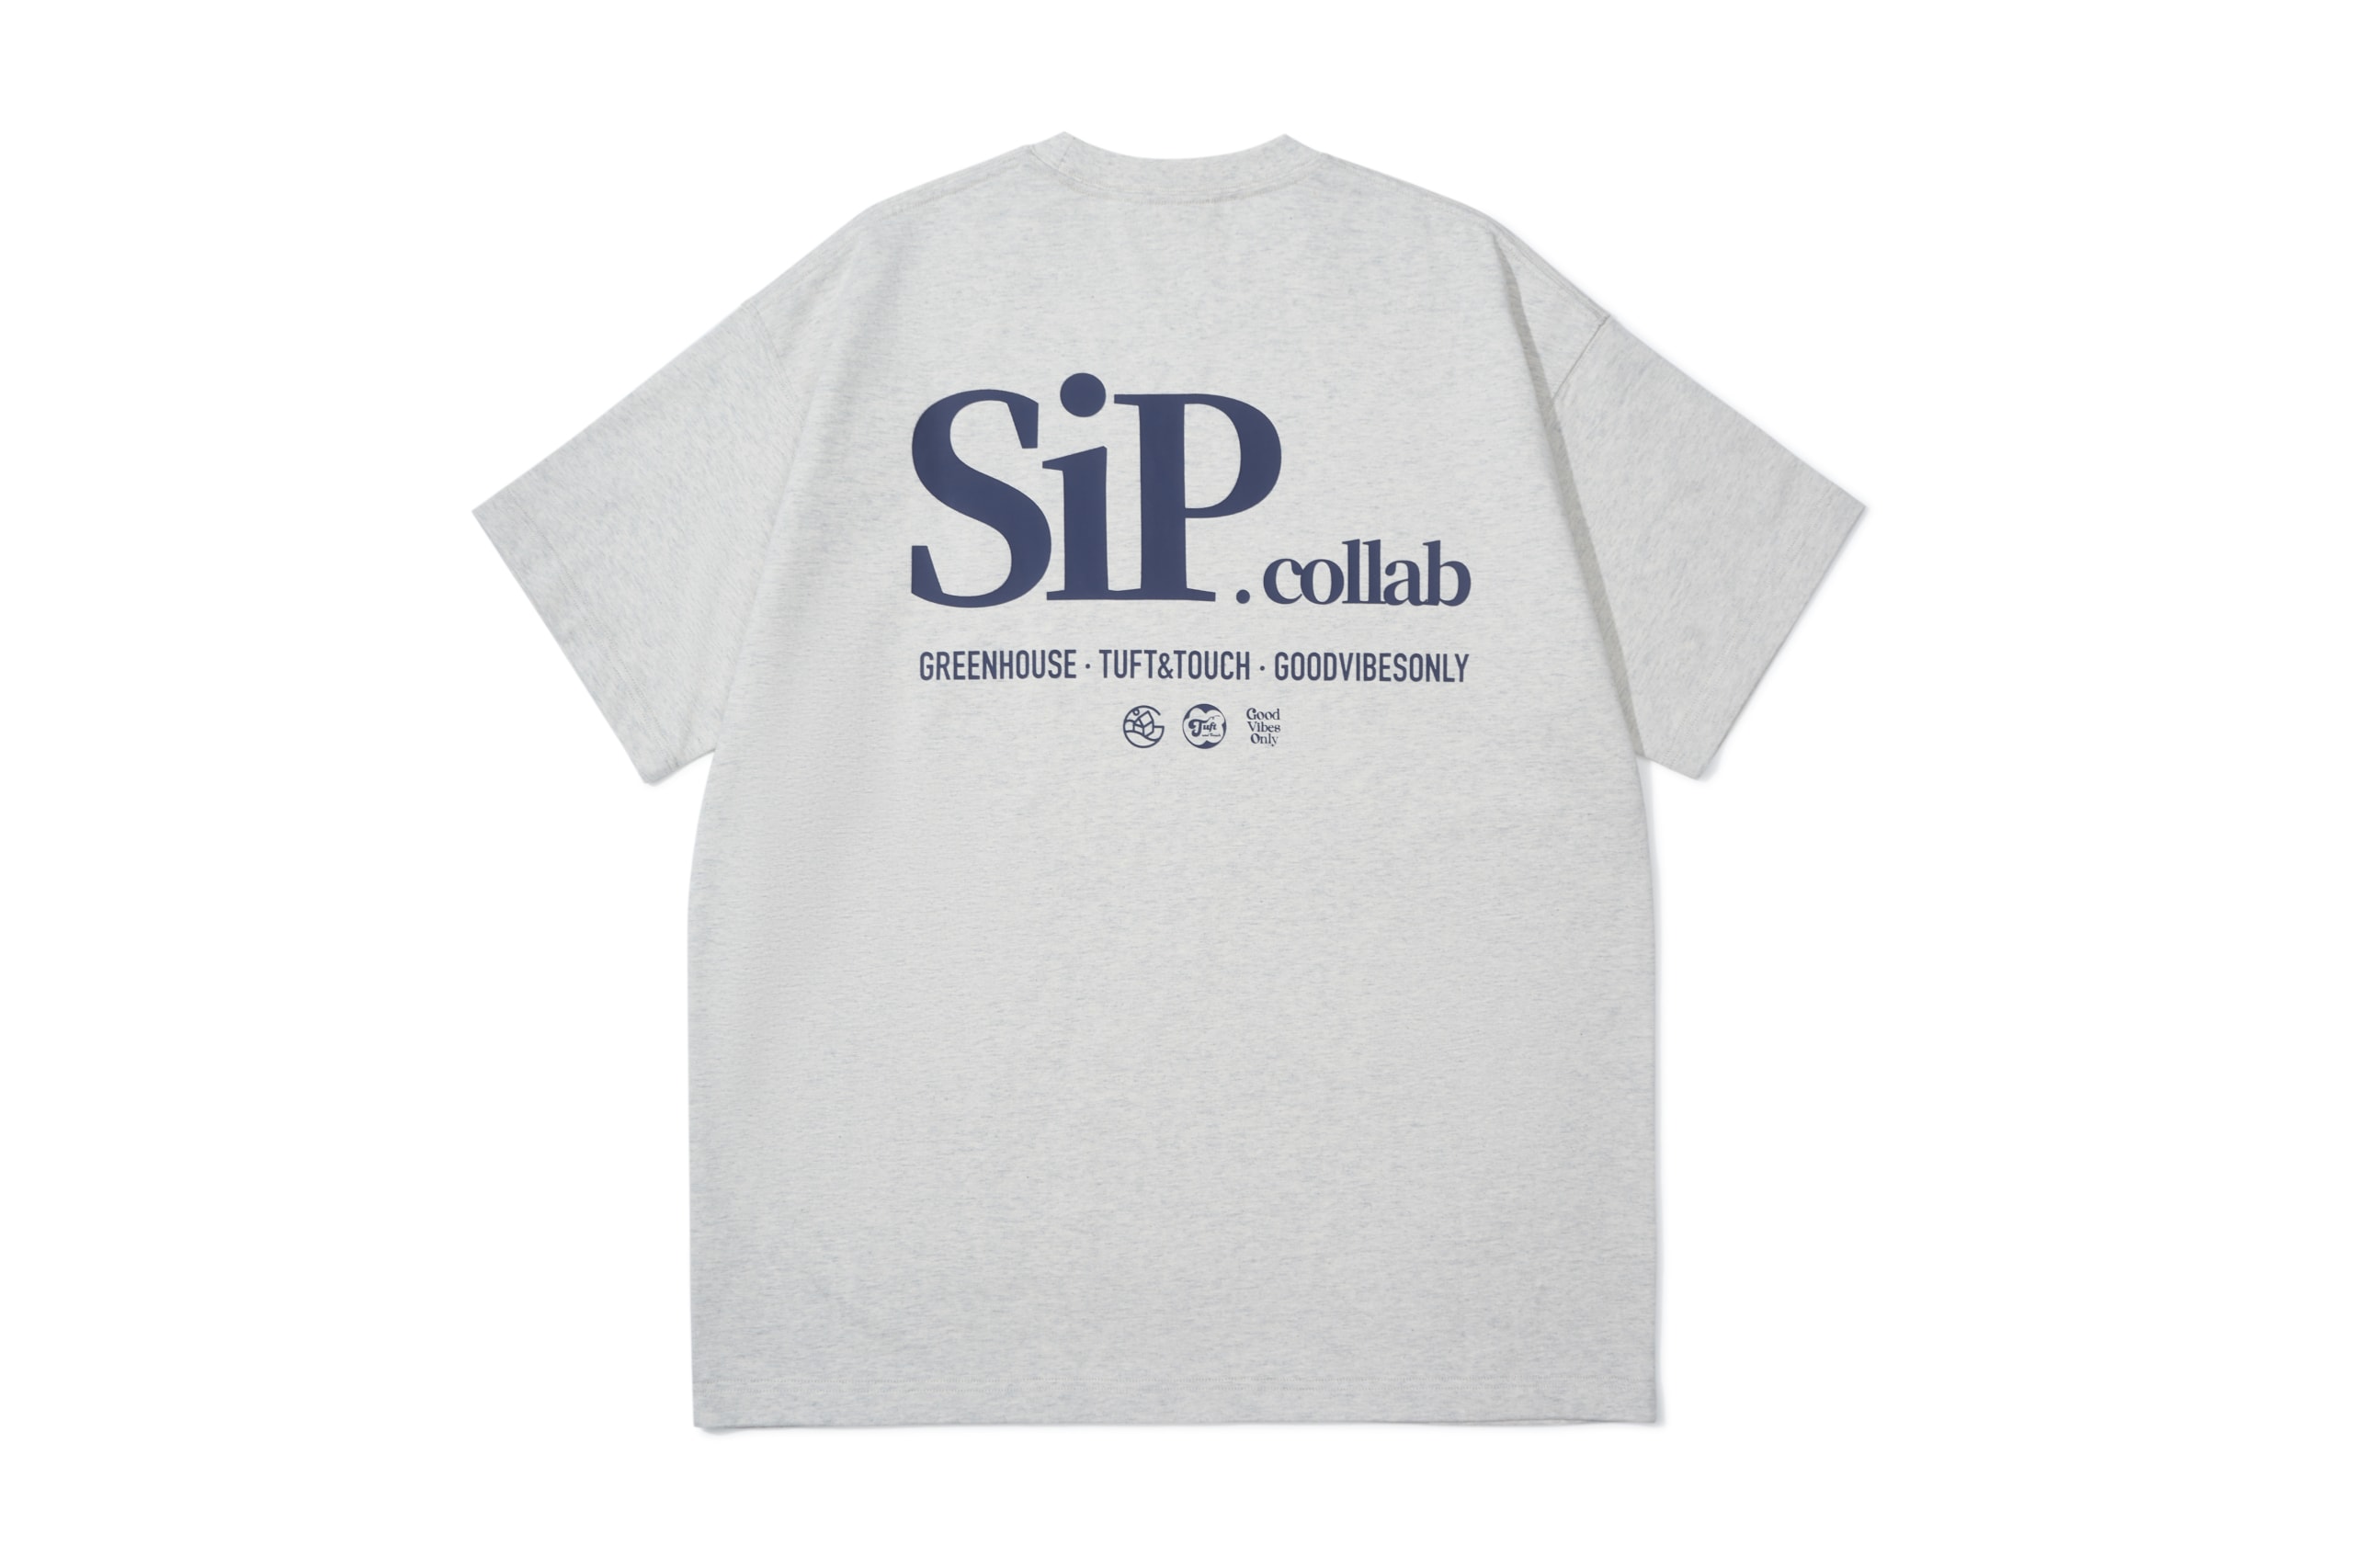 GoodVibesOnly x GREEN HOUSE x TUFT & TOUCH 开启三方联名「SiP.collab」